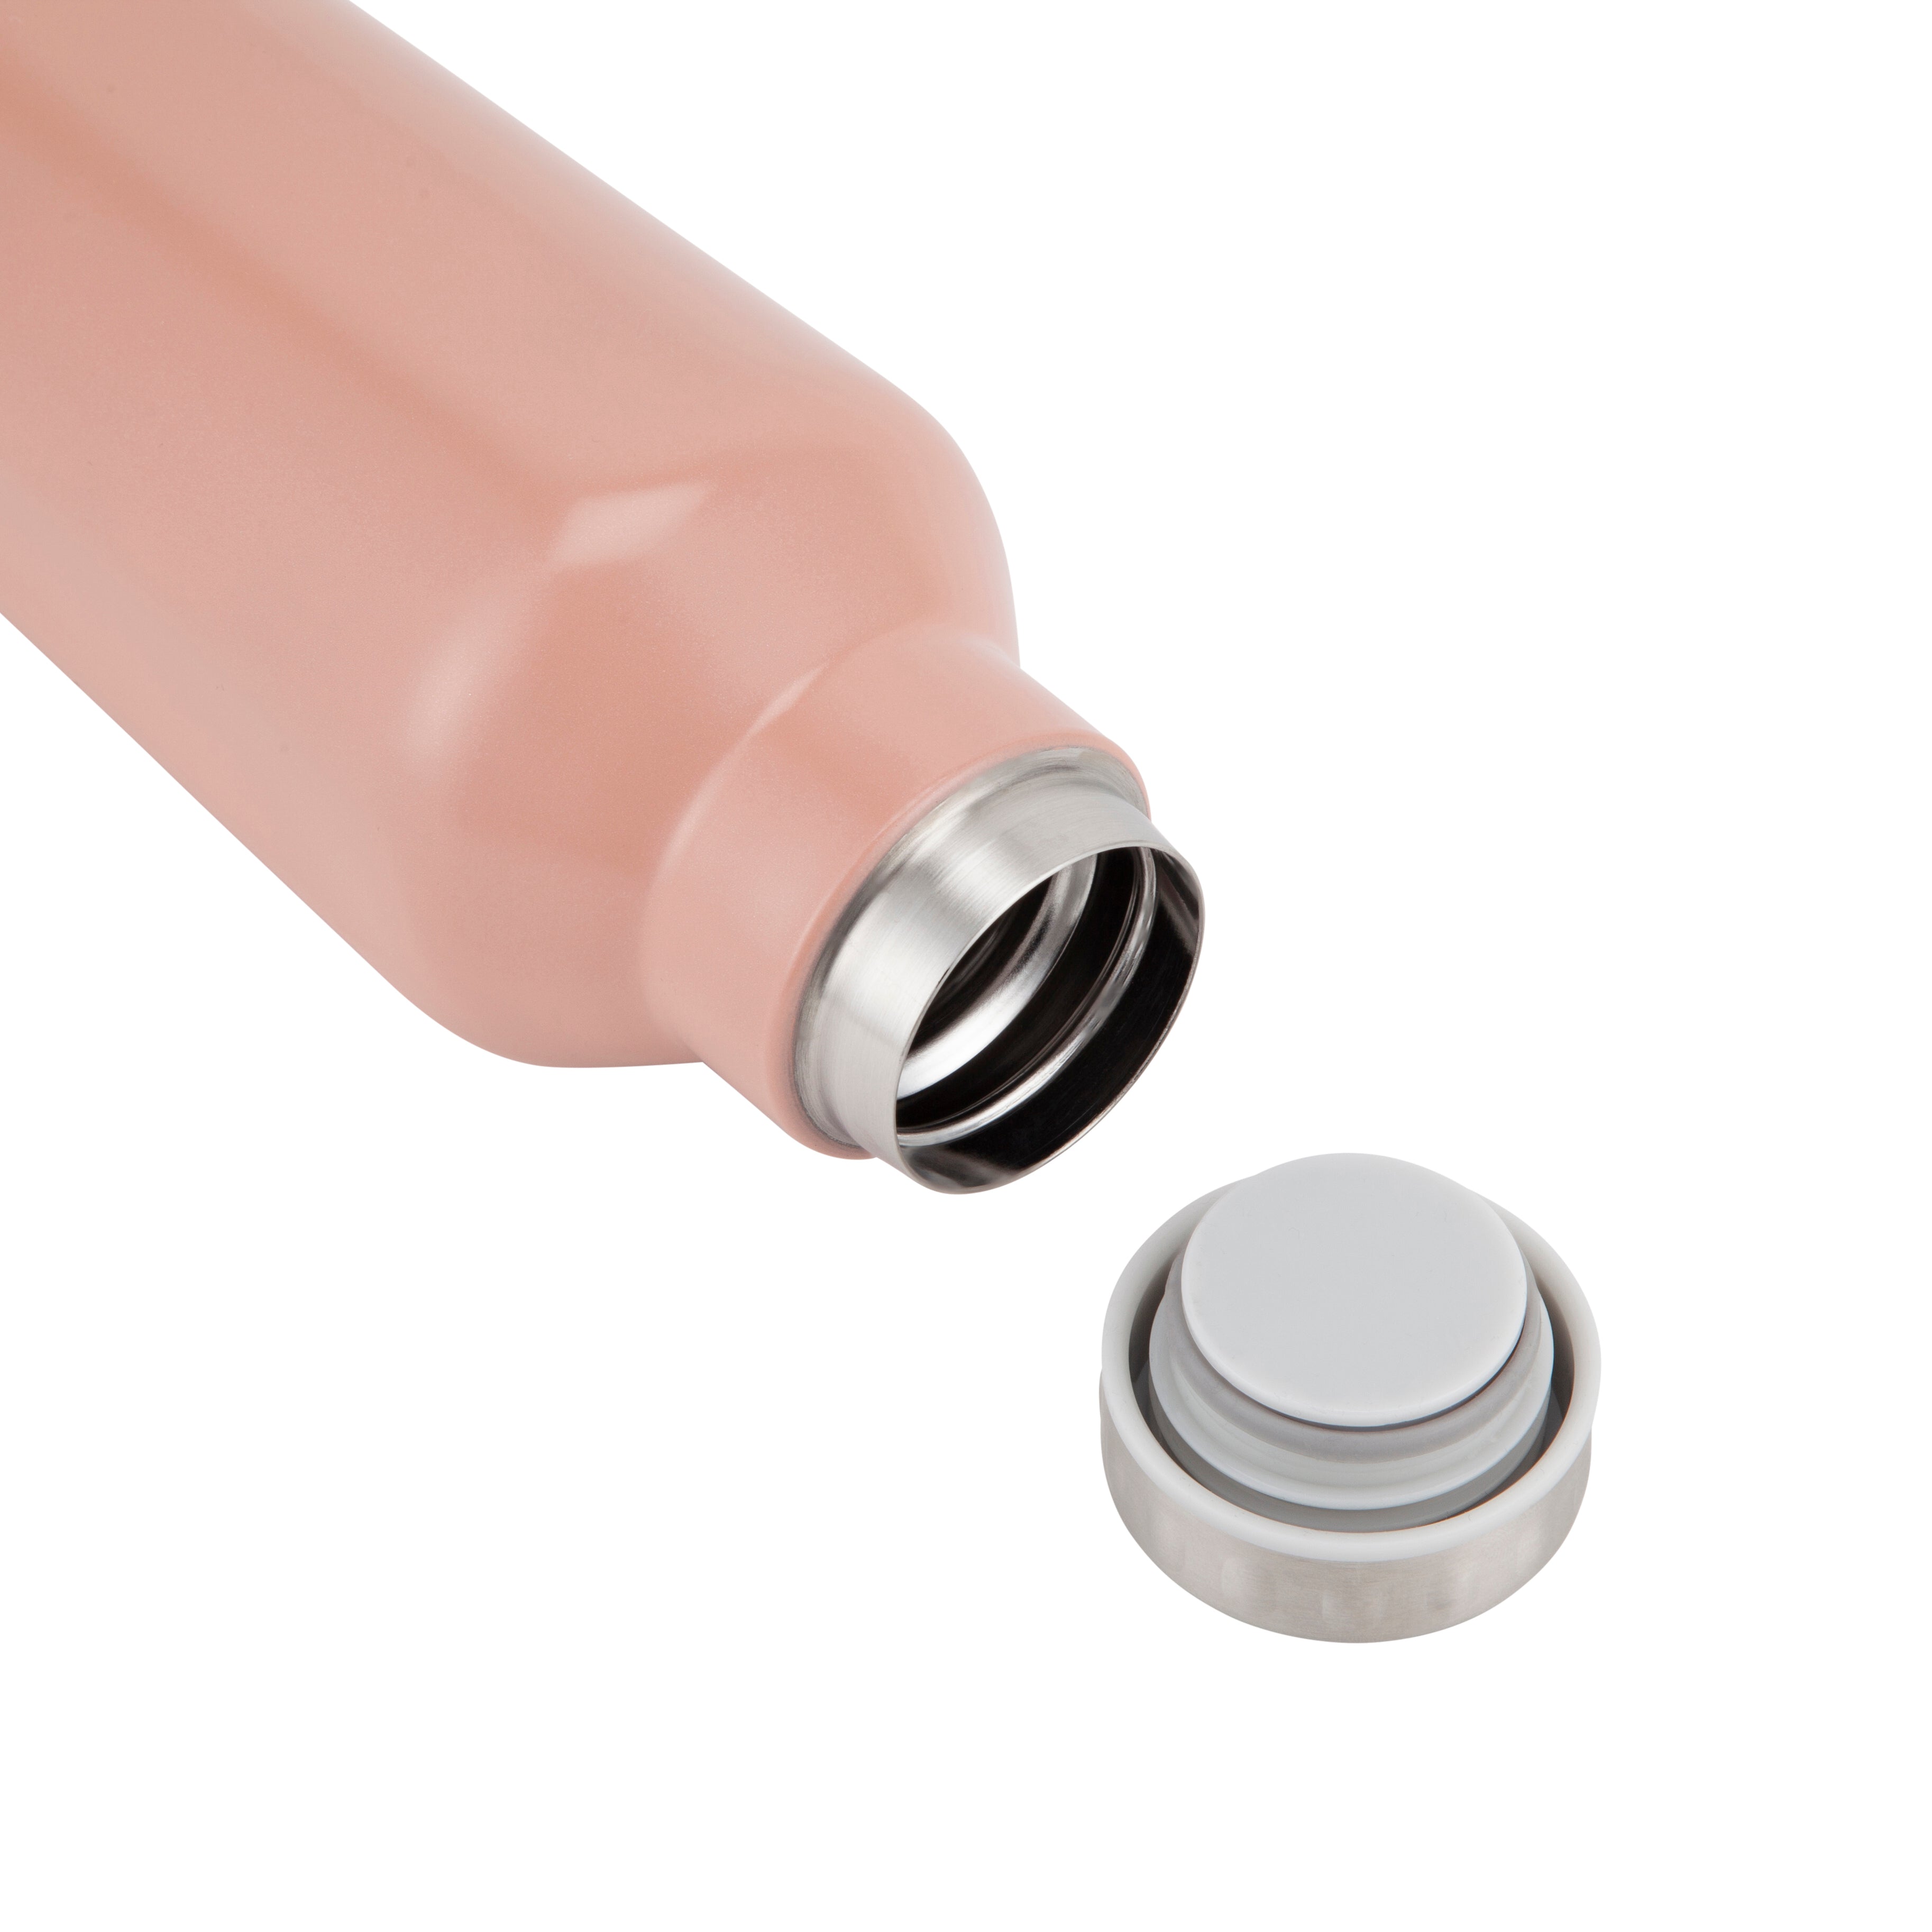 Blush Pink Stainless Steel Drinks Bottle From Fable Yoga